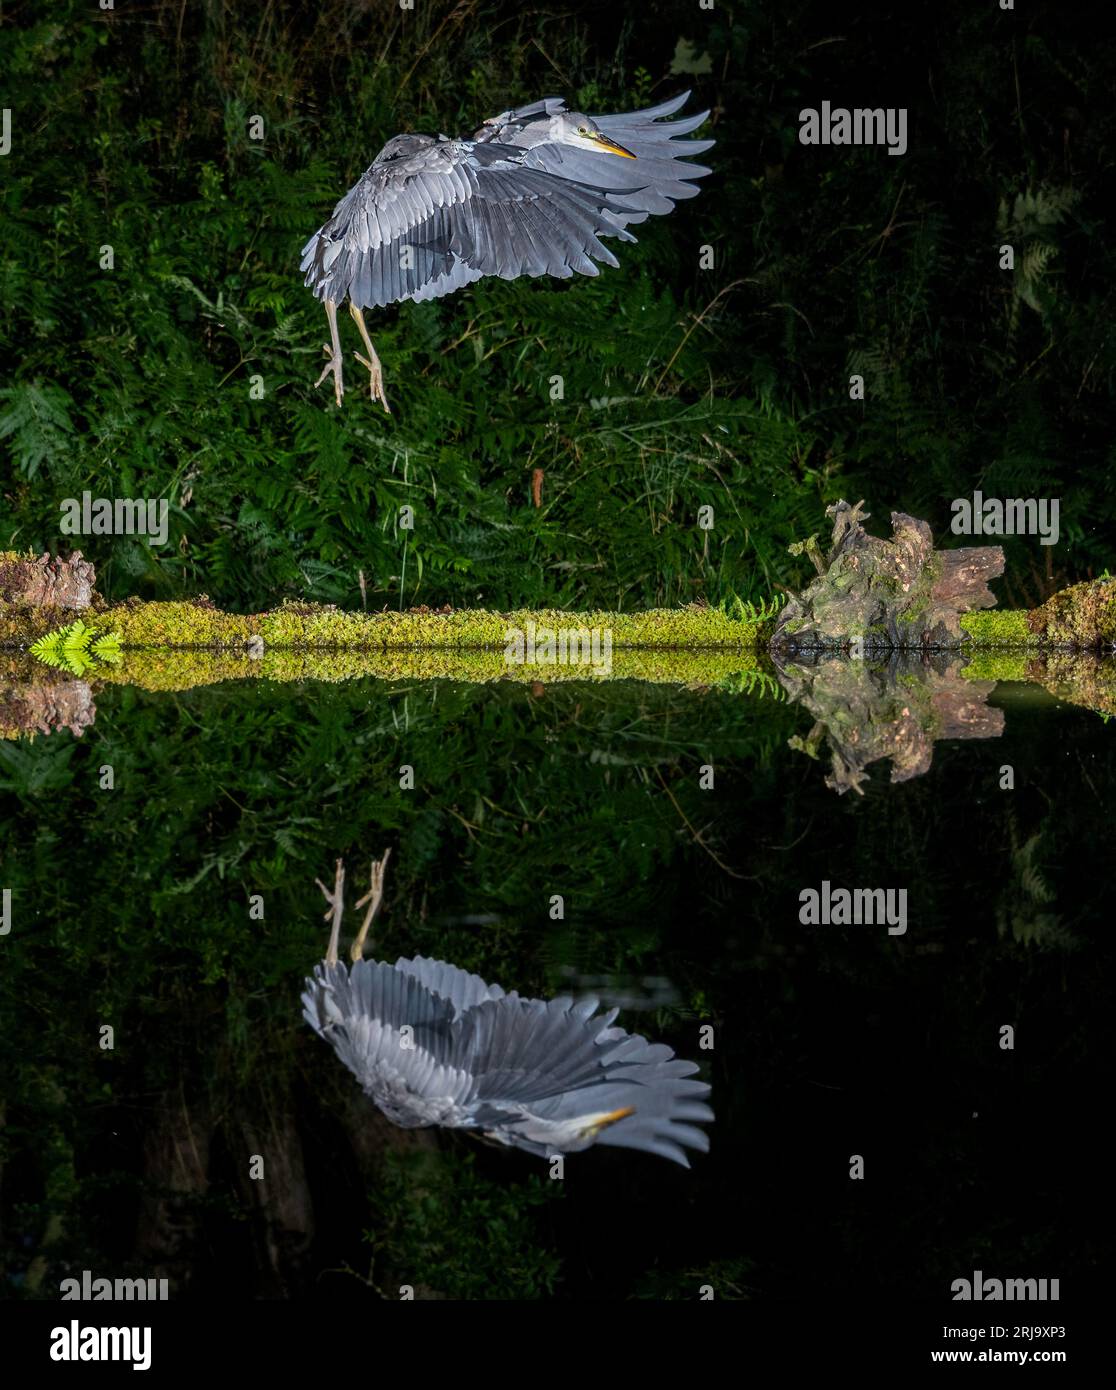 Captured at night, a grey. gray heron in flight with wings spread. It is coming in to land at a pool and is reflected in the water Stock Photo